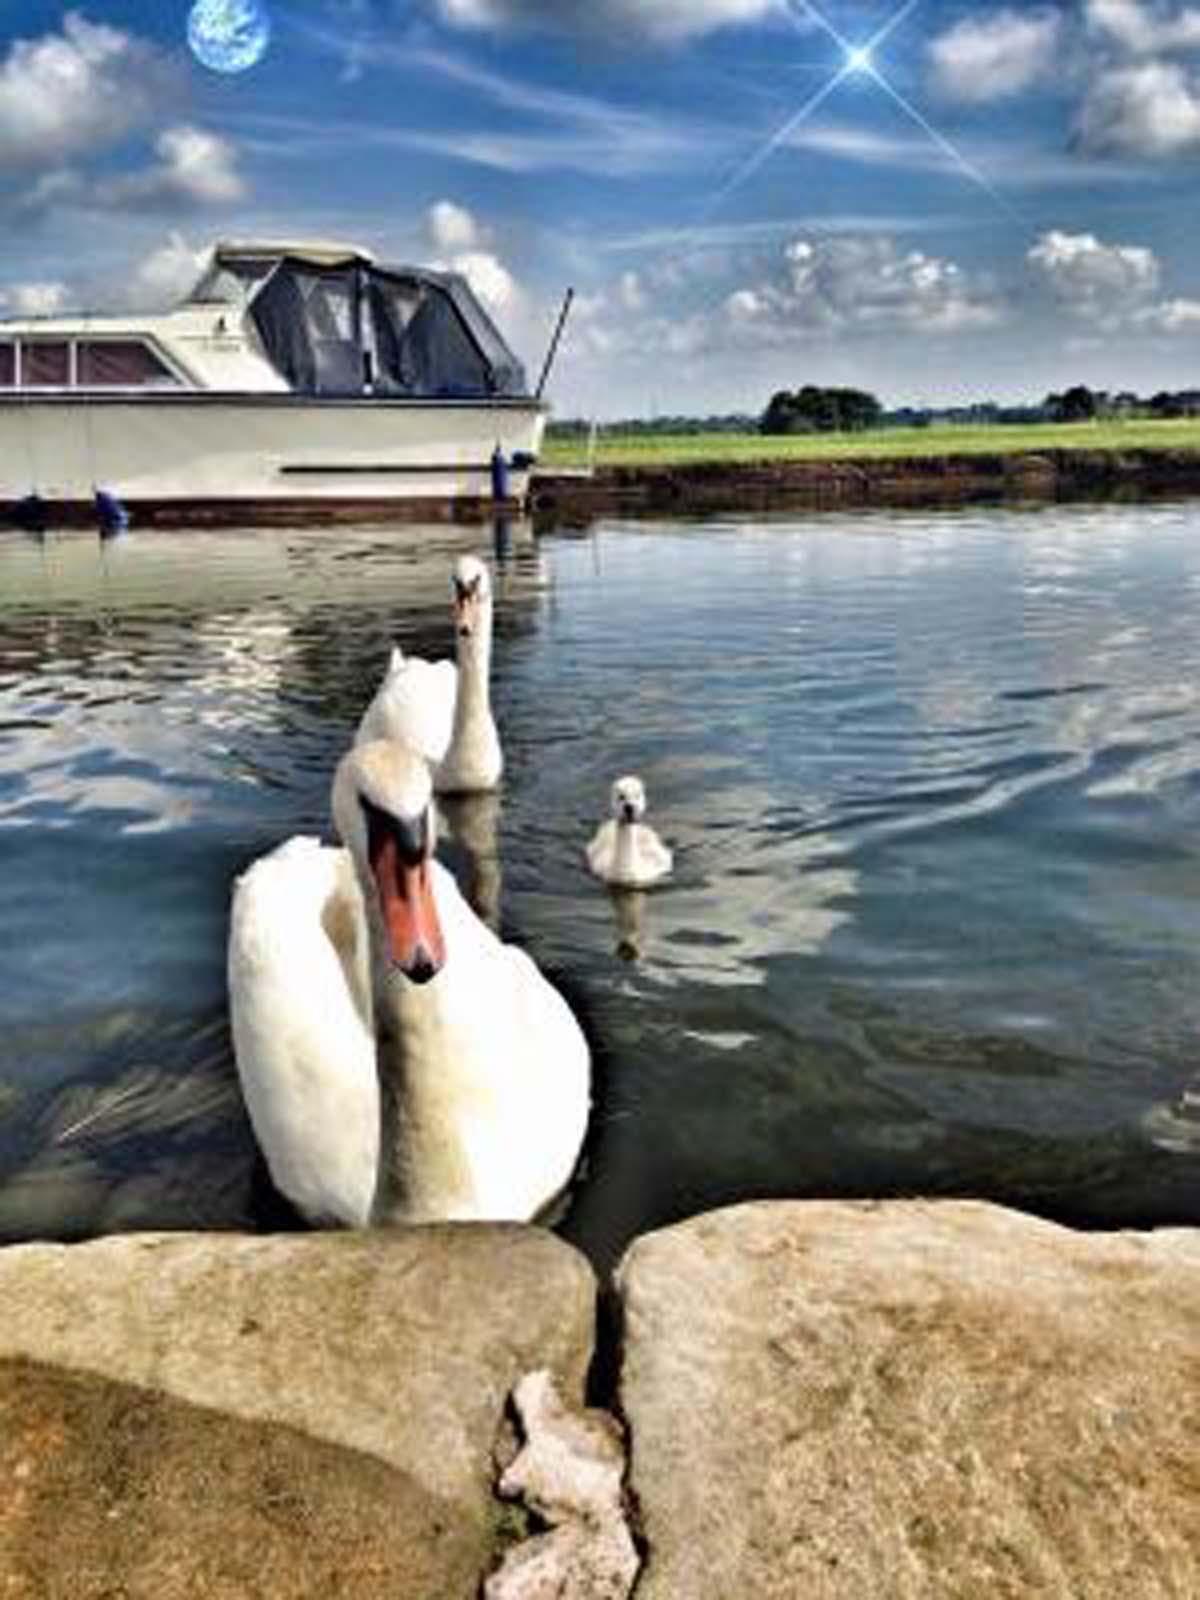 Reader Chris Robinson sent in this lovely picture of swans on the Bridgewater Canal.